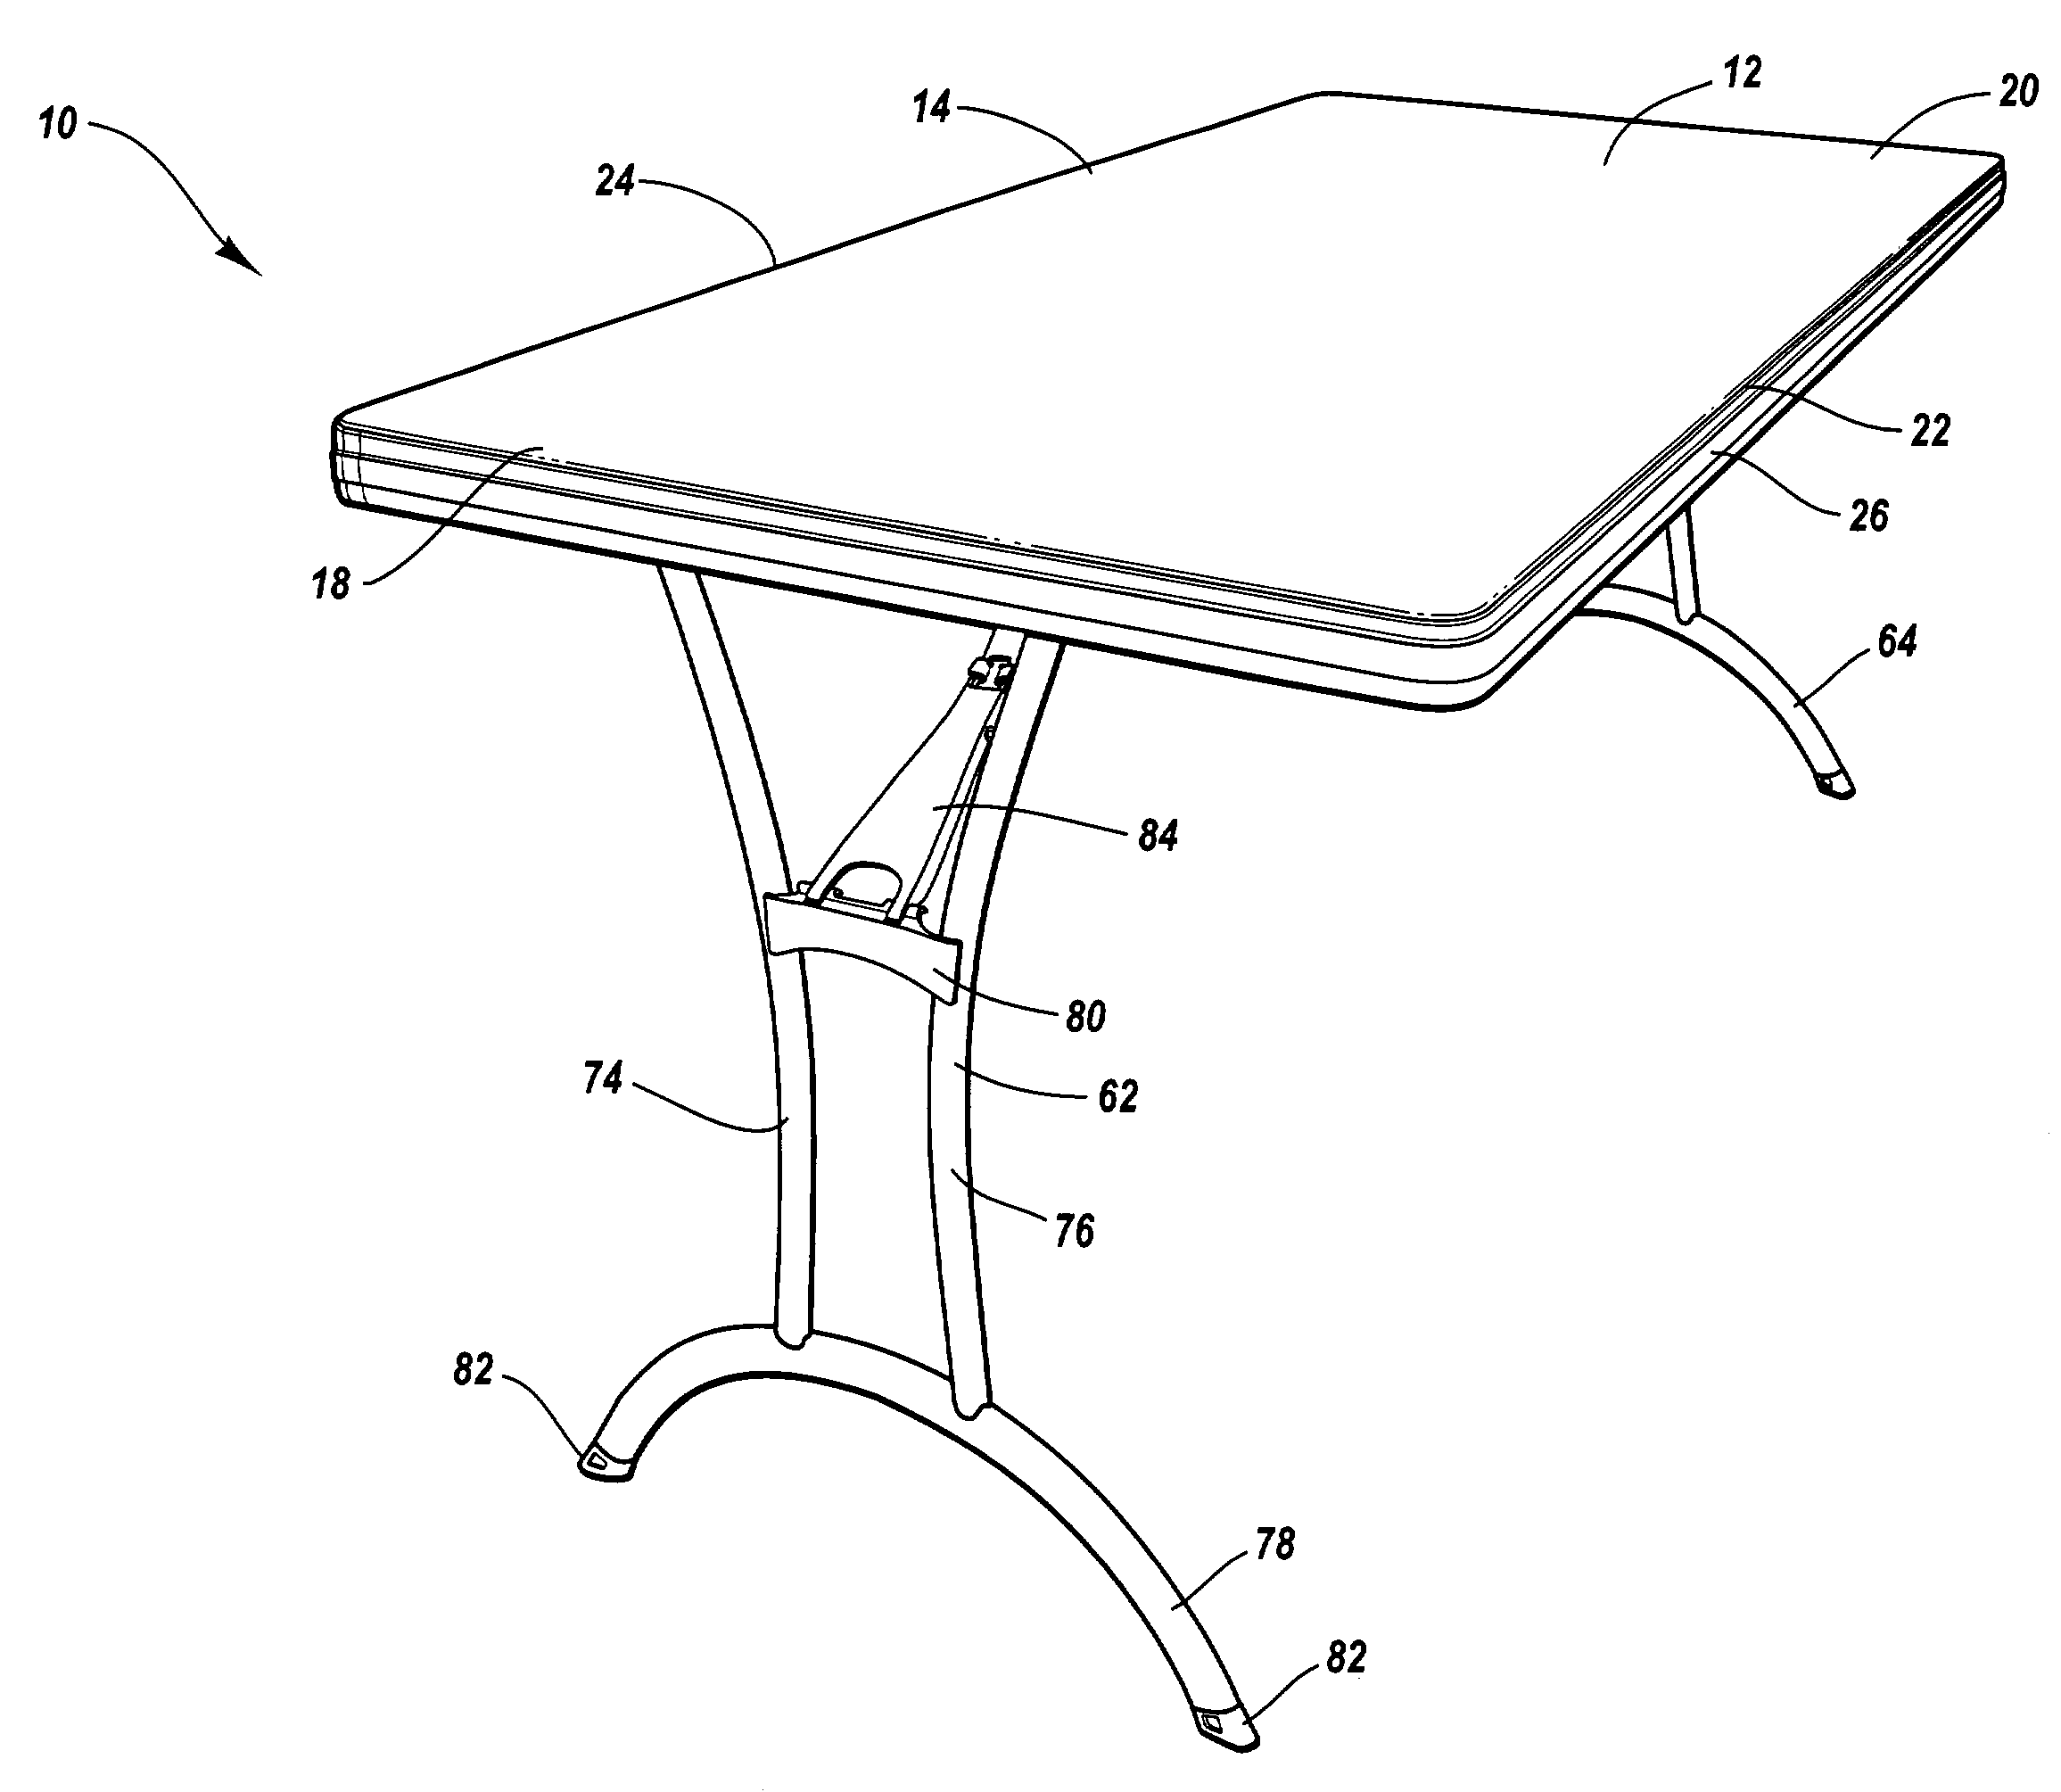 Pivotal connection of a table leg to a frame